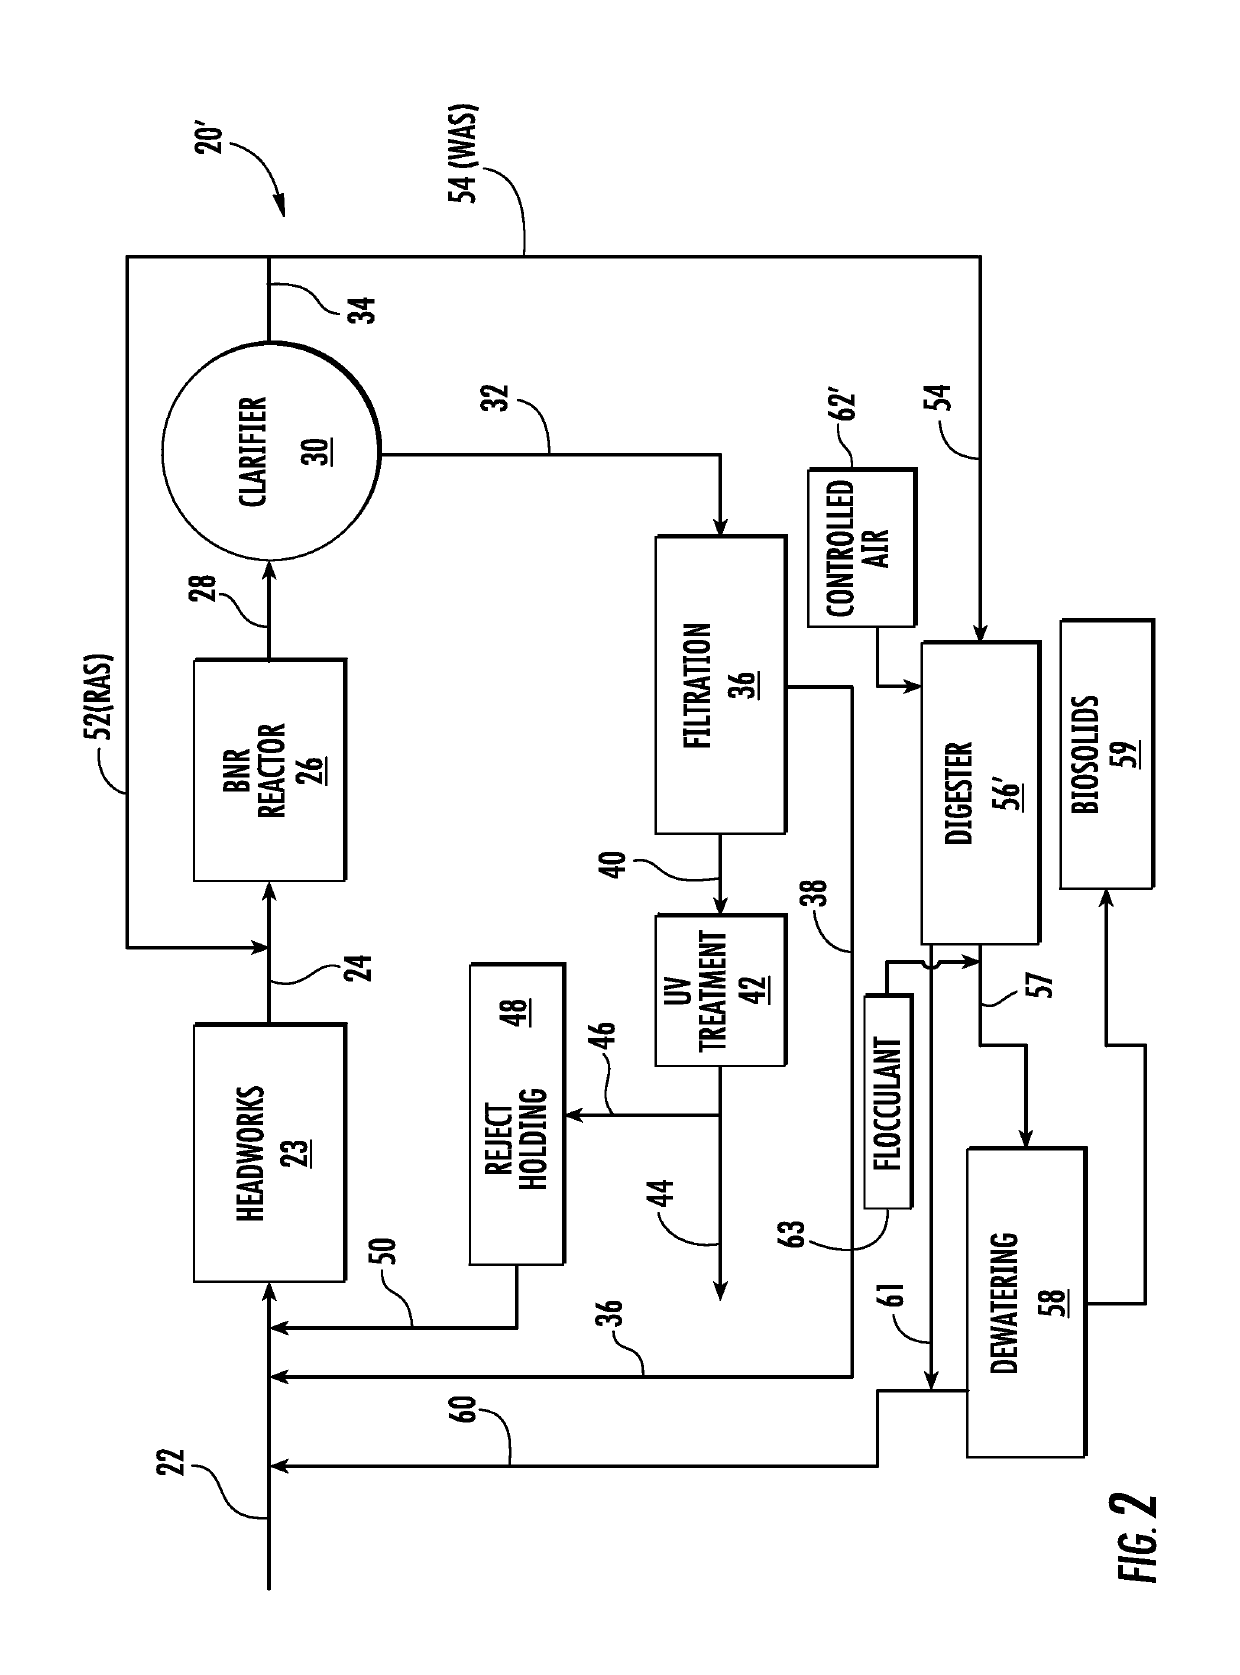 Systems and methods for enhanced facultative biosolids stabilization